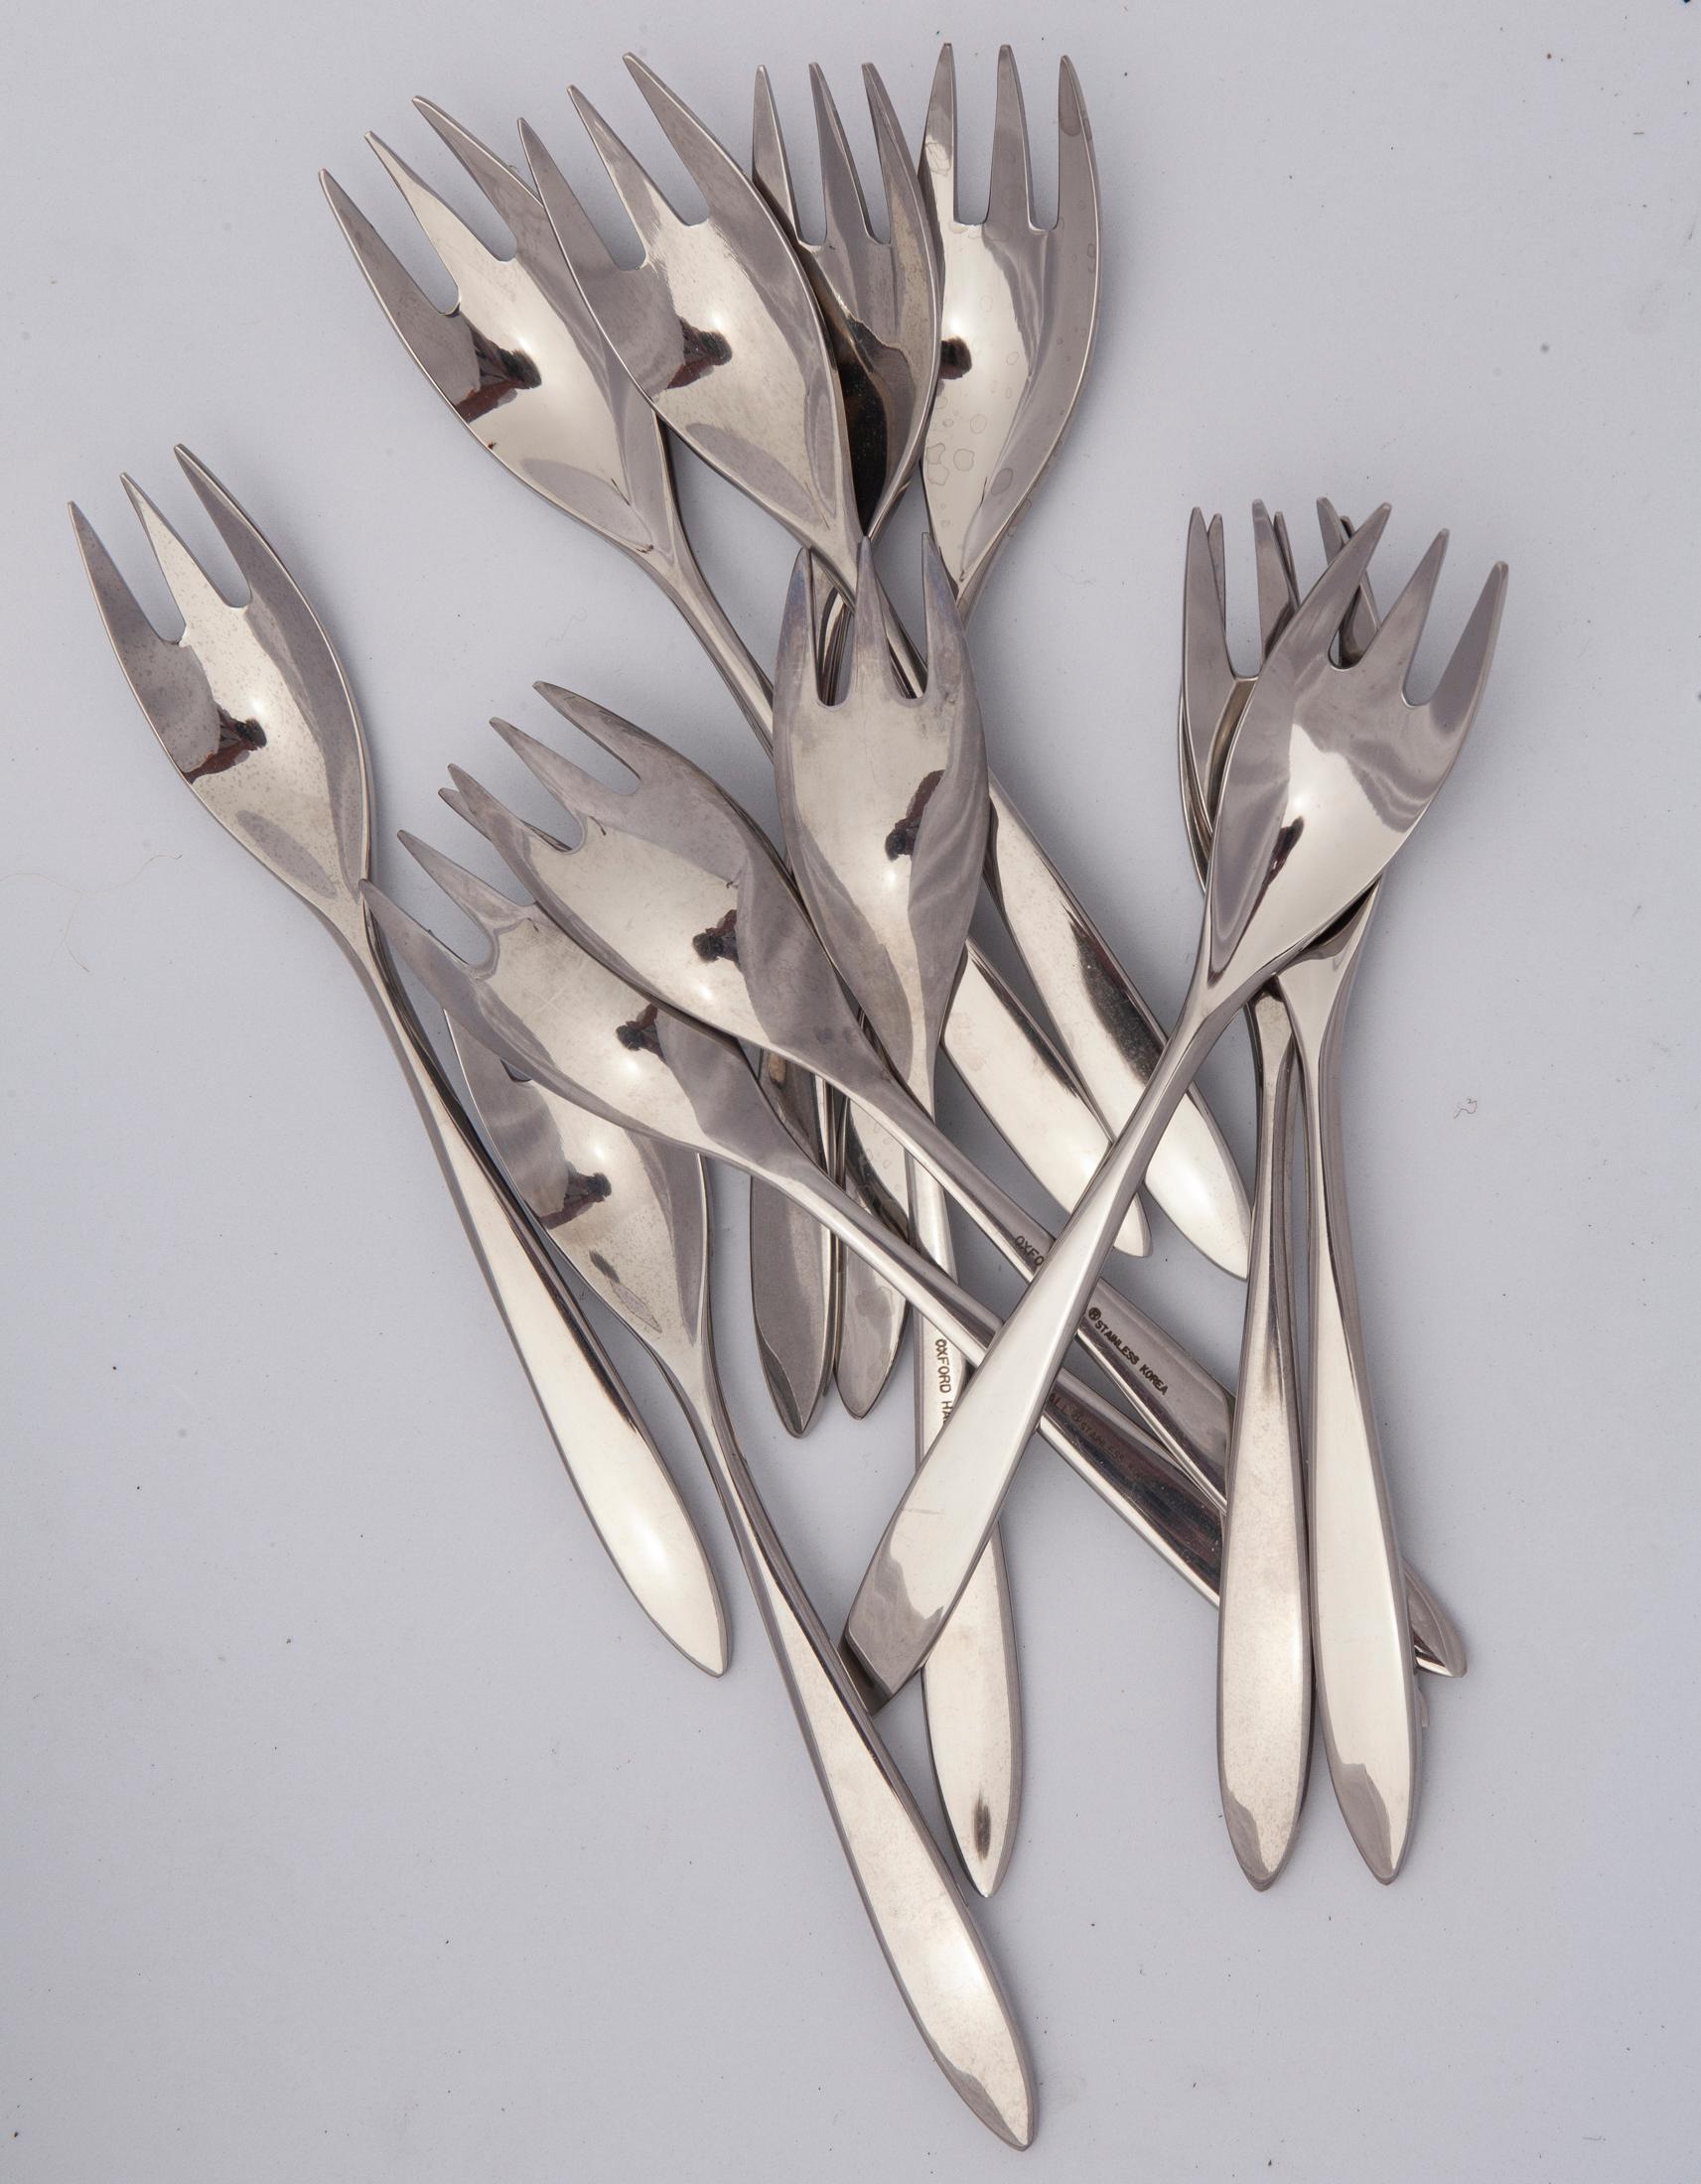 Stainless Steel Scandinavian Modern Style Stainless-Steel Flatware by Oxford Hall; 60 pieces